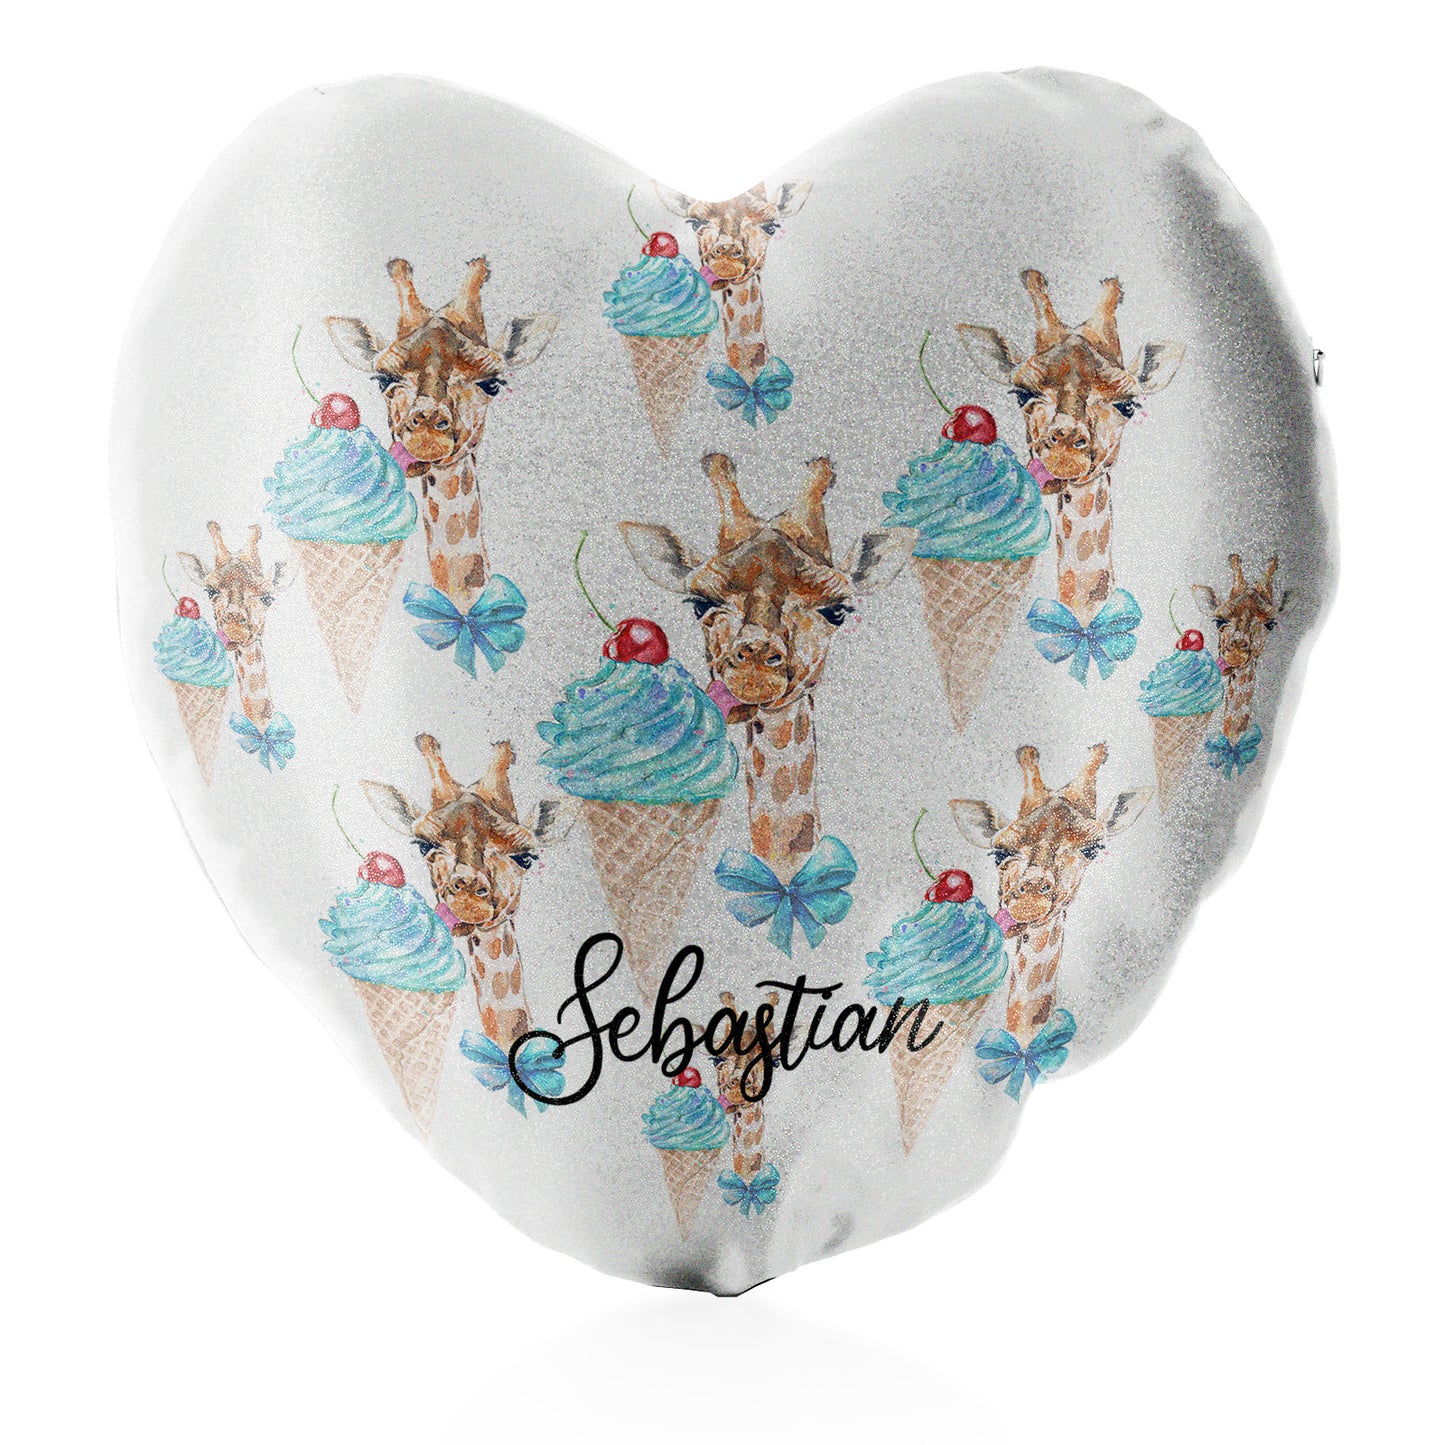 Personalised Glitter Heart Cushion with Giraffe Blue Ice creams and Cute Text